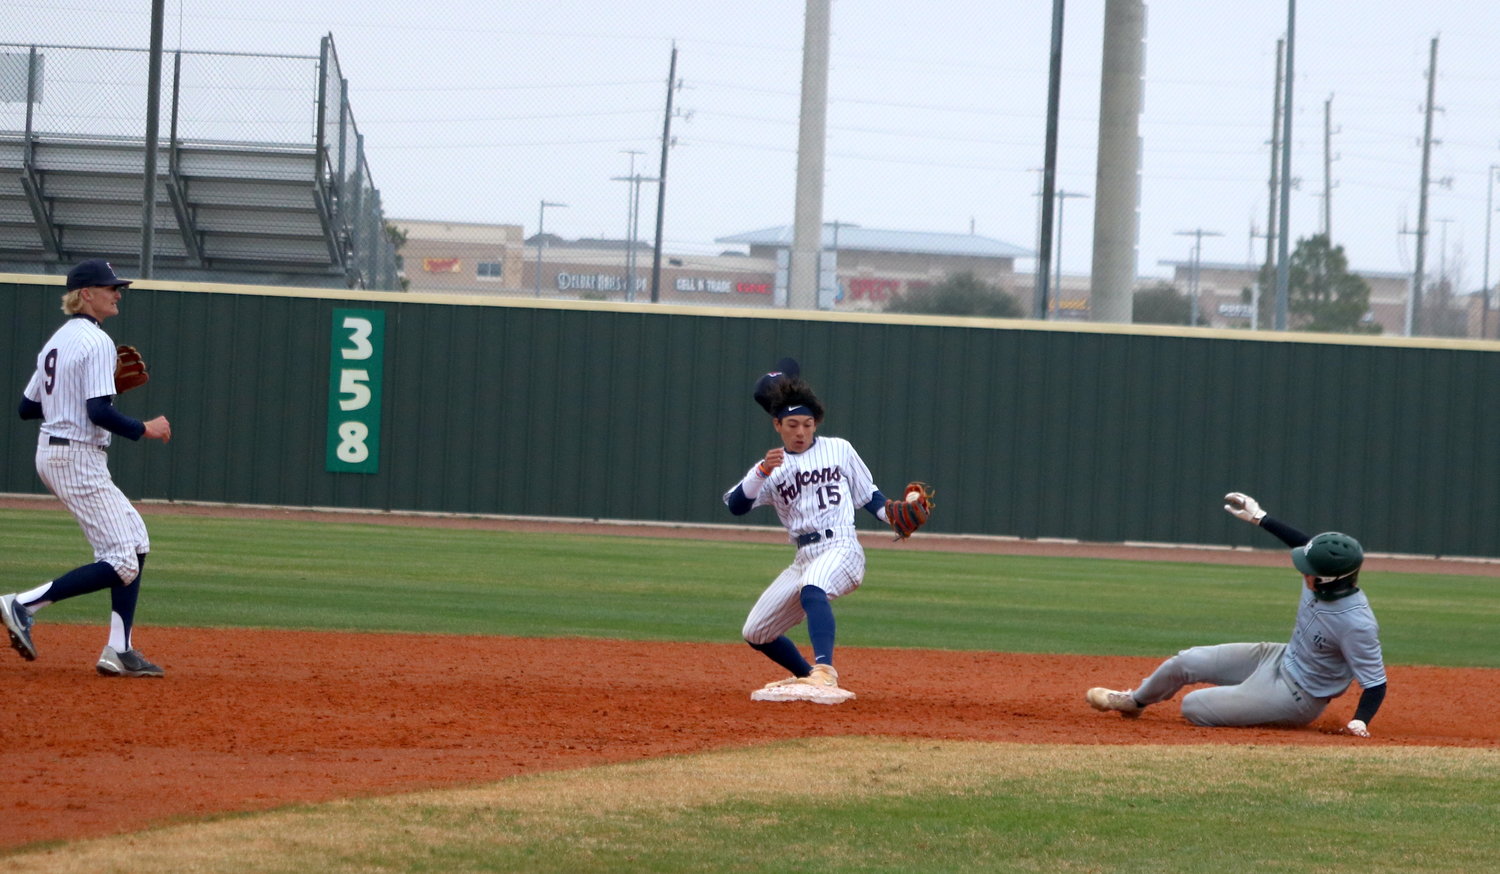 Ivan Gomez steps on second base to record an out during Thursday’s game between Tompkins and San Antonio Reagan at the Tompkins baseball field.